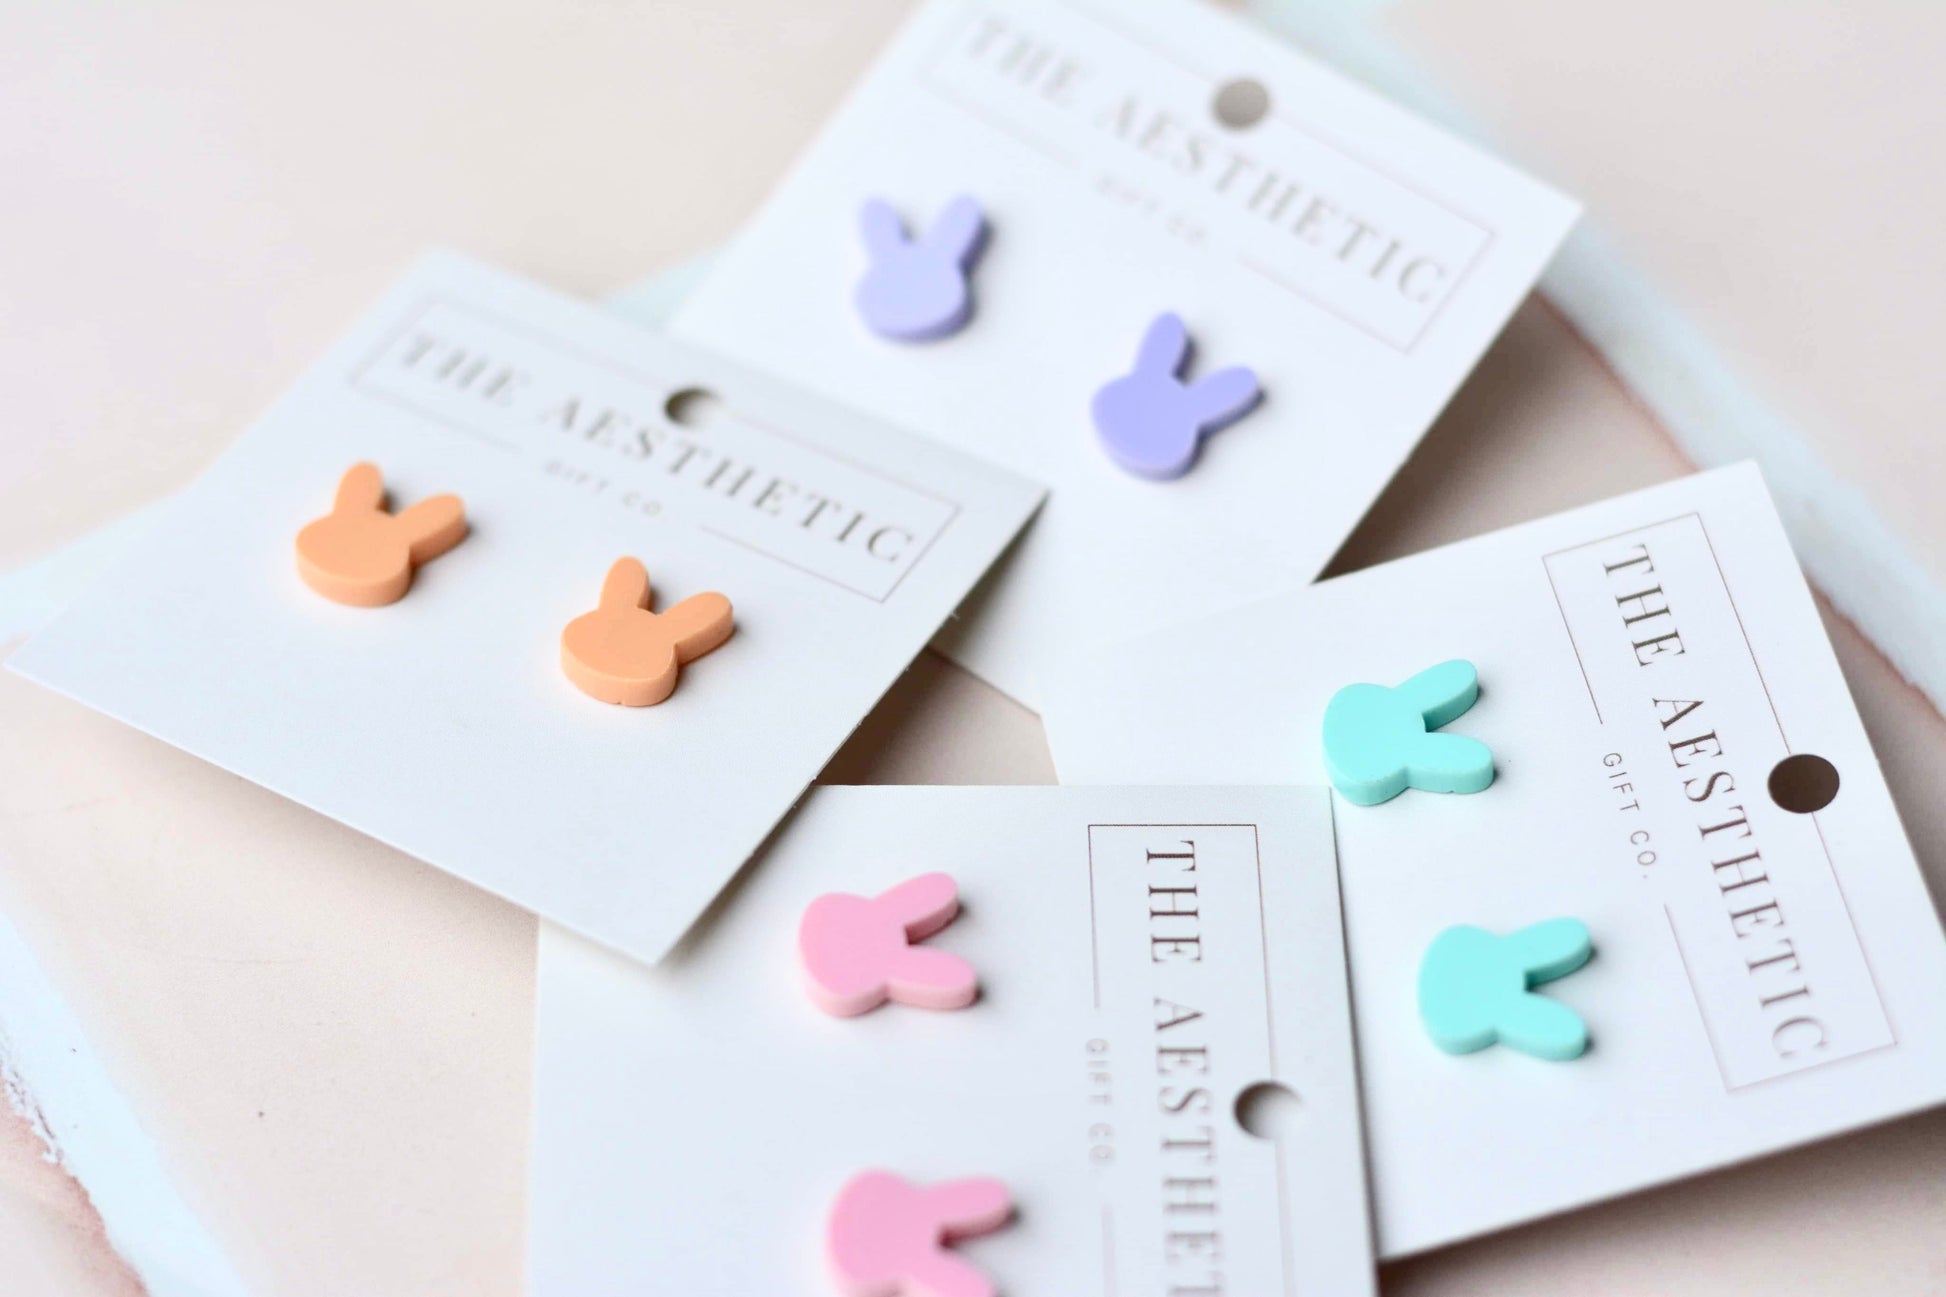 Bunny studs - Premium  from The Aesthetic Gift Co - Just $12.0! Shop now at The Aesthetic Gift Co